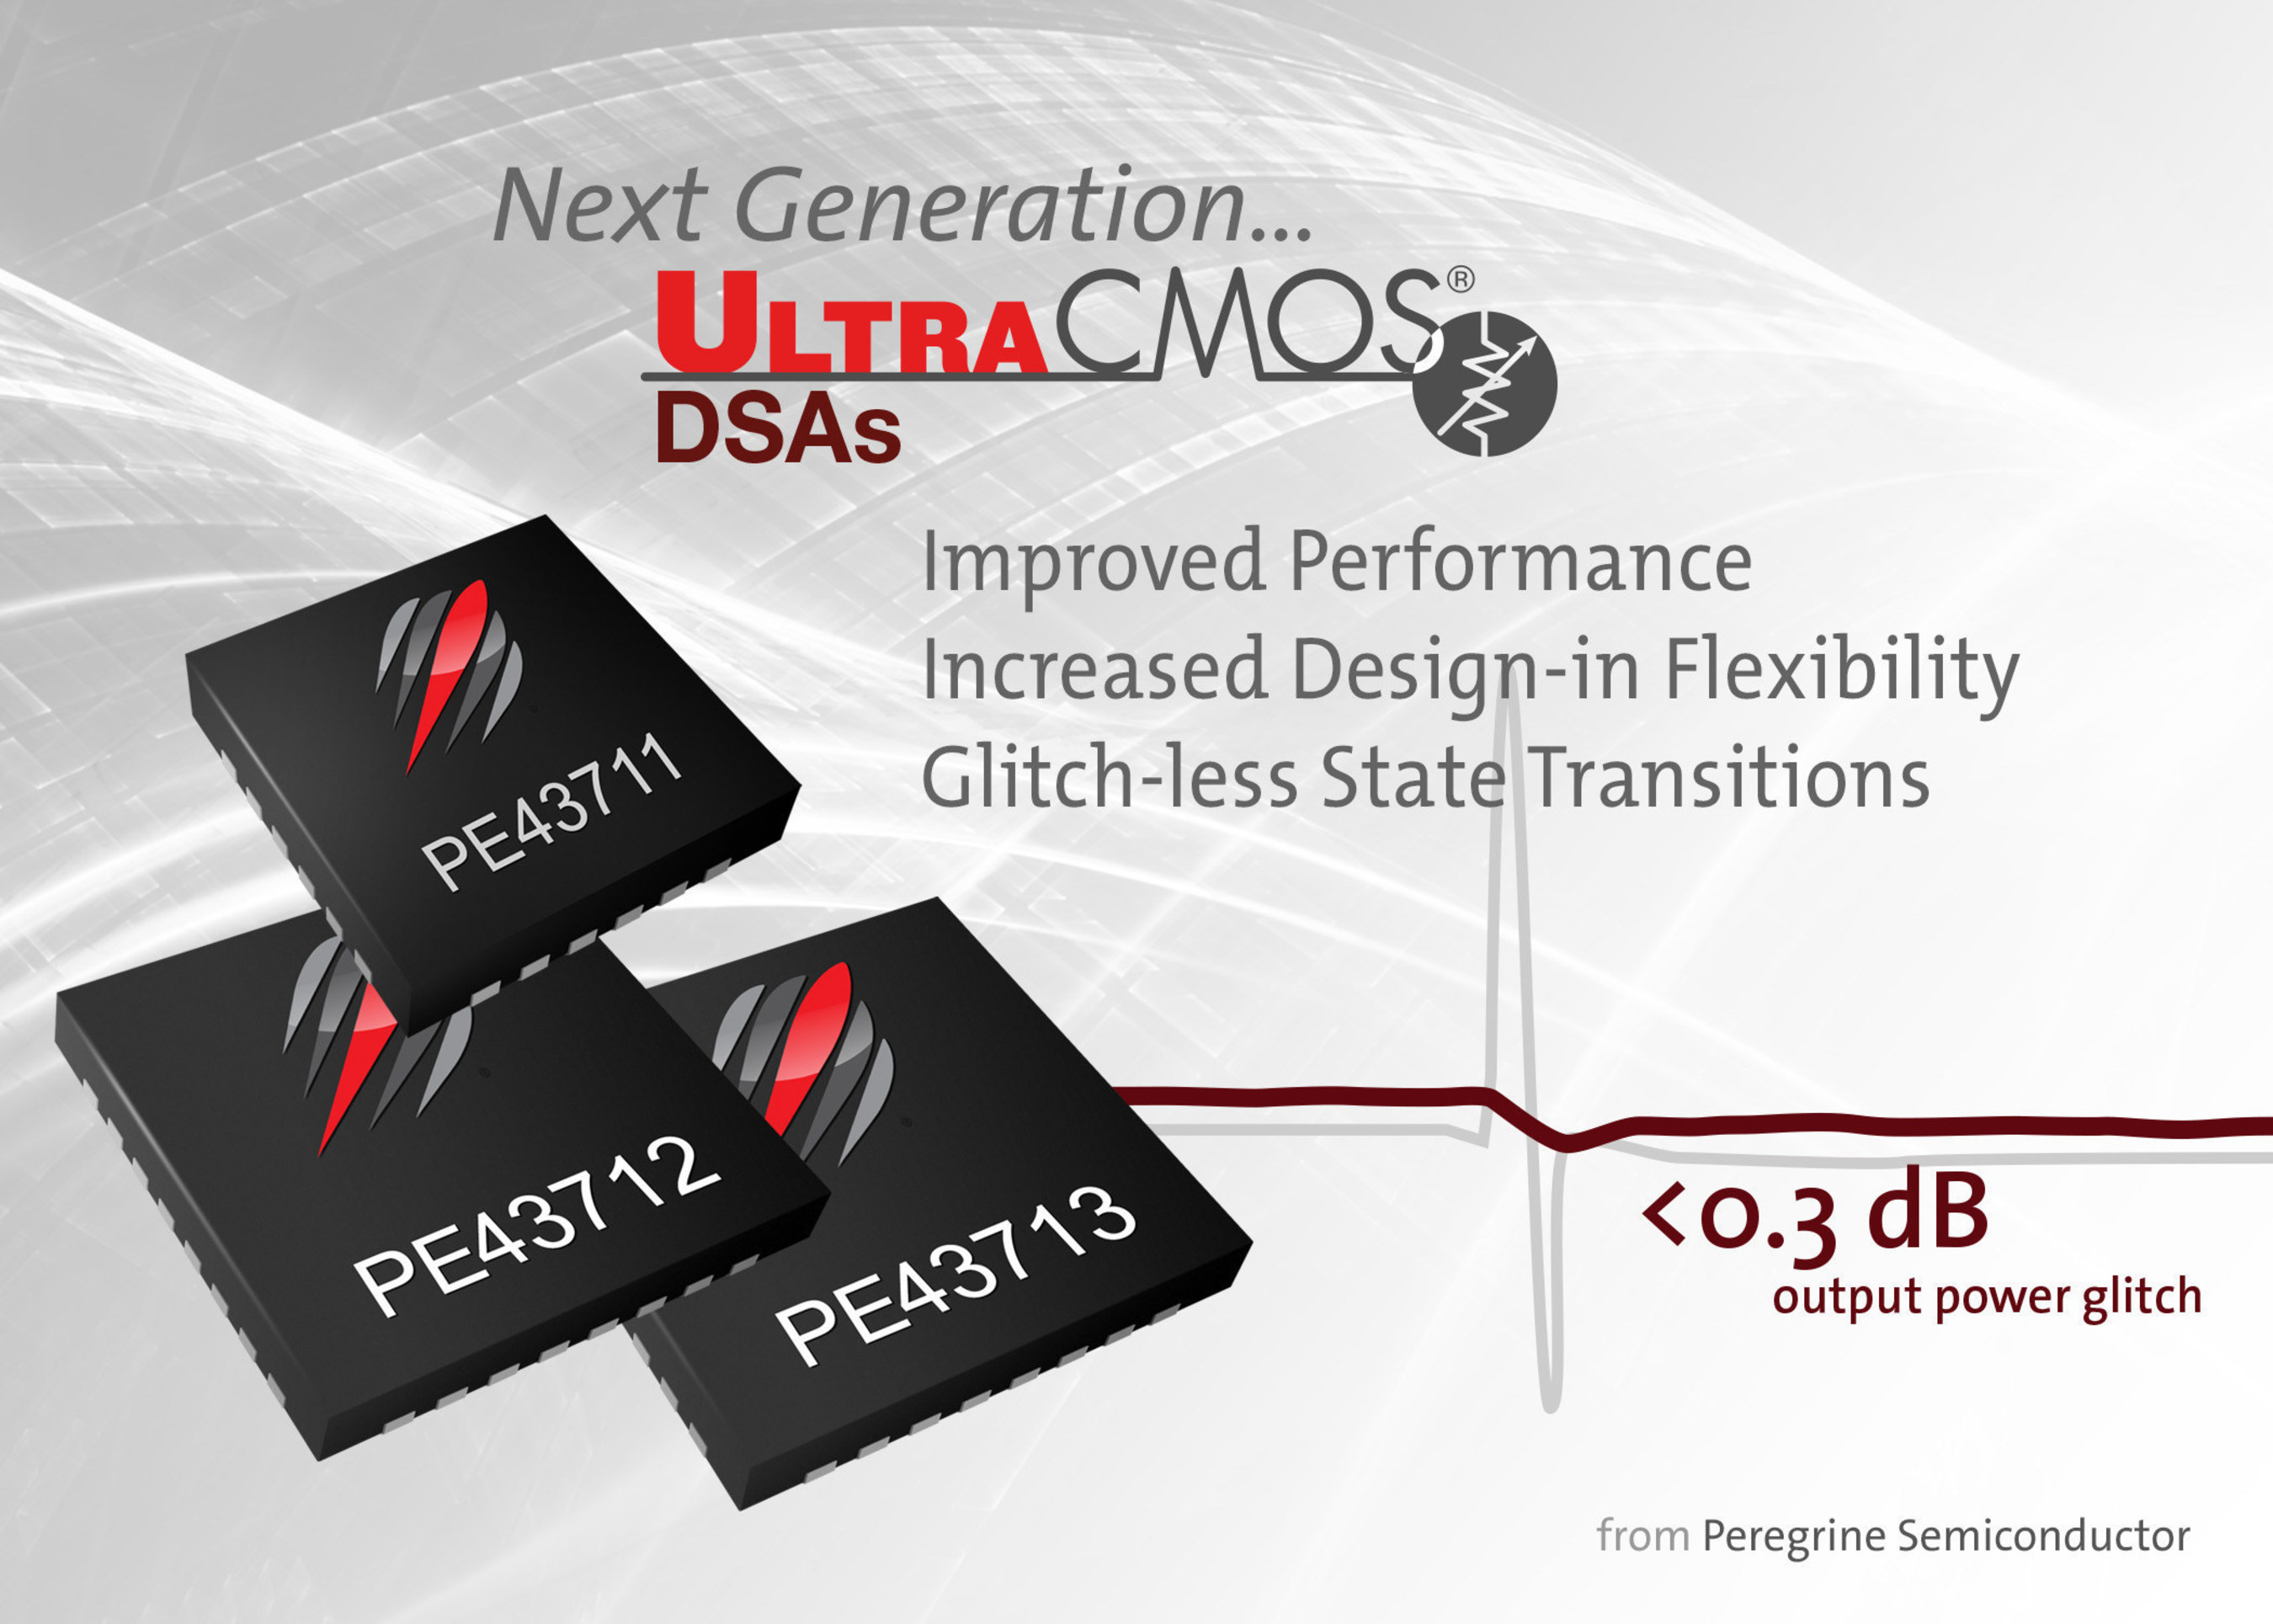 Peregrine Semiconductor's next-generation, glitch-less digital step attenuators (DSAs), the UltraCMOS(R) PE43711, PE43712 and PE43713, provide glitch-less attenuation state transitions, increased design-in flexibility and performance upgrades.